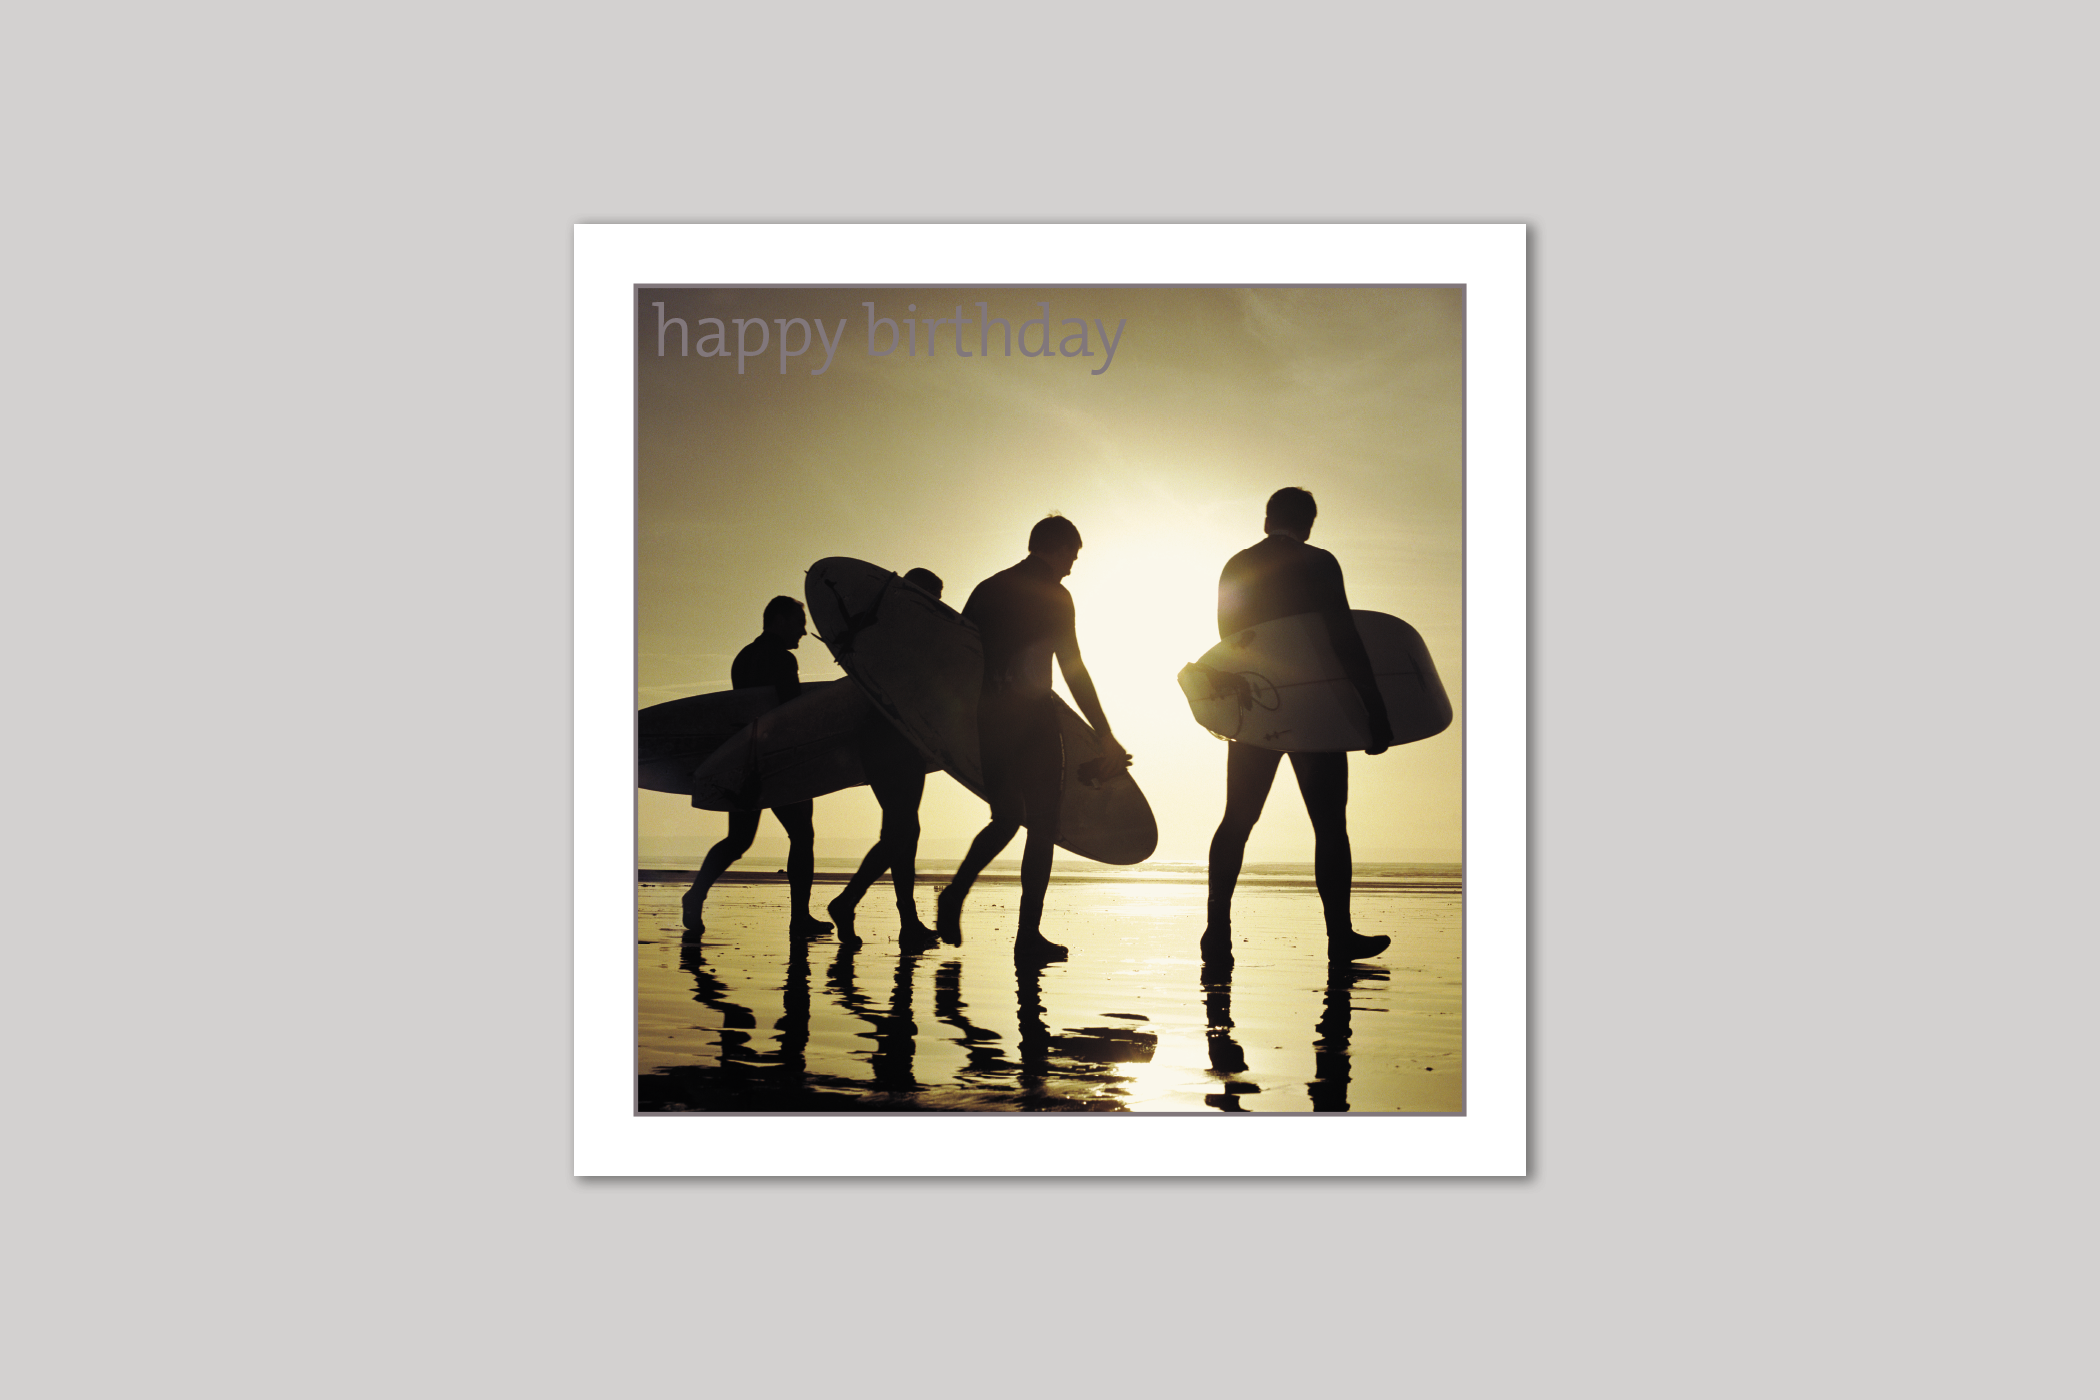 Sunset Surfers from Exposure Silver Edition range of greeting cards by Icon.